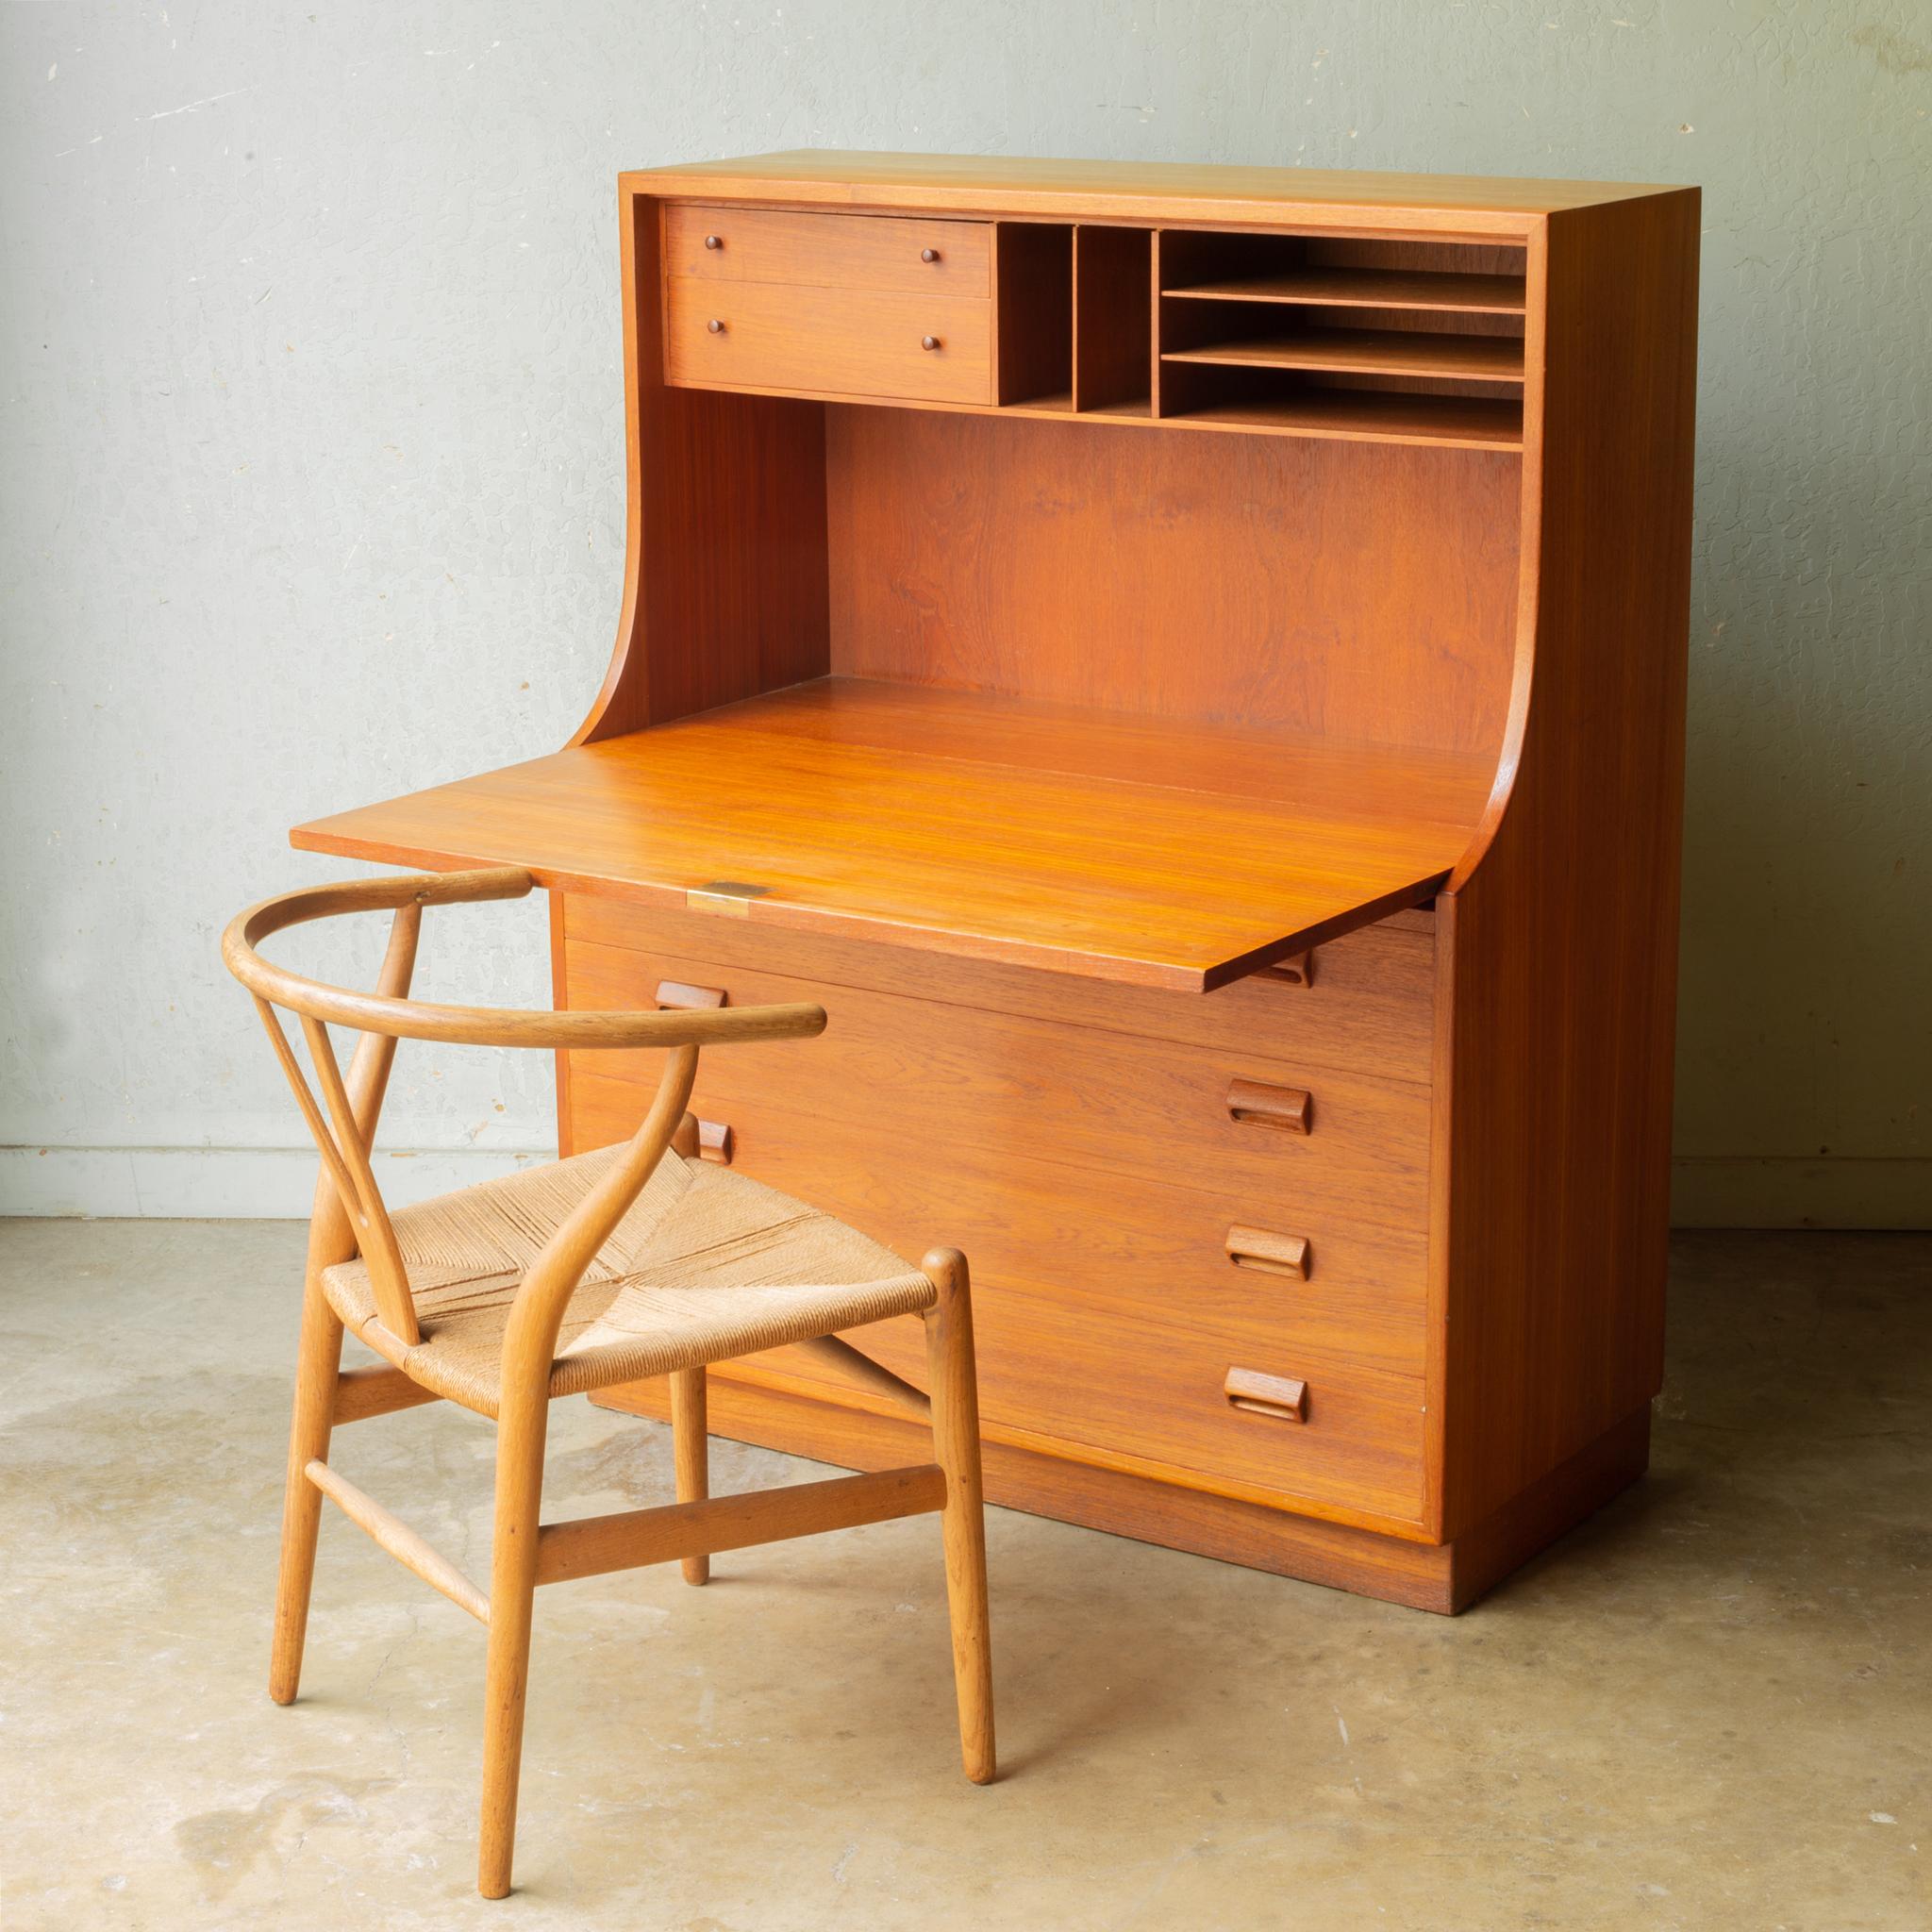 About

This is a teak secretary/desk designed by Borgo Mogensen for Soborg Mobler. This statement piece has rich wood grain and sharply, curved drawer pulls. Drop the lid down and it converts into a desk with space for a laptop, multiple cubbies